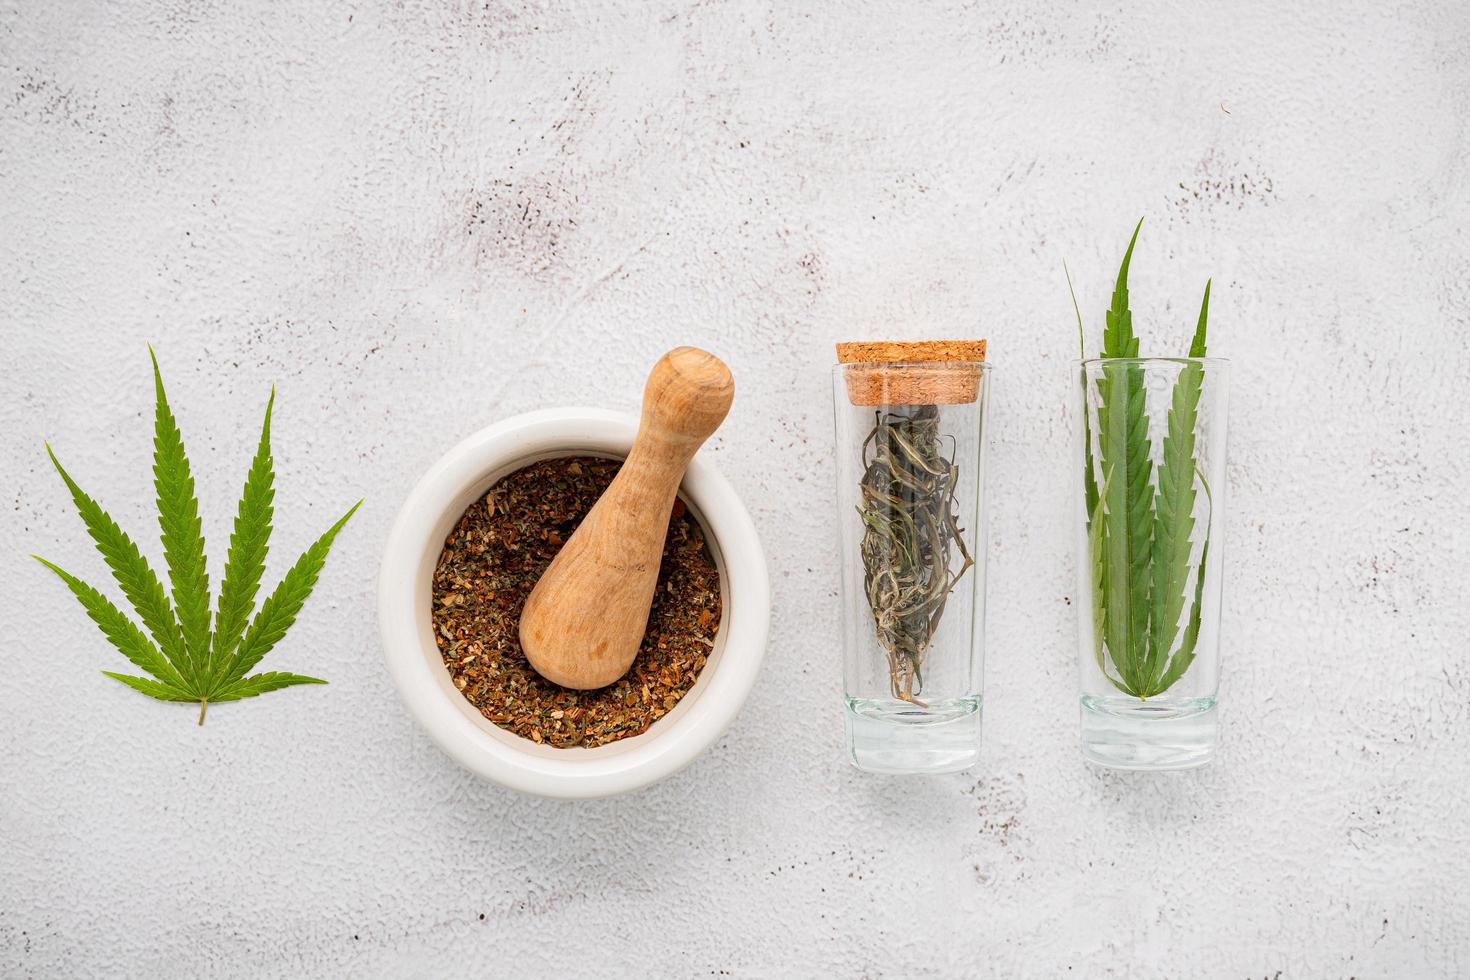 Glass bottle of hemp oil with a white mortar and hemp leaves set up on a concrete background, aromatherapy concept photo